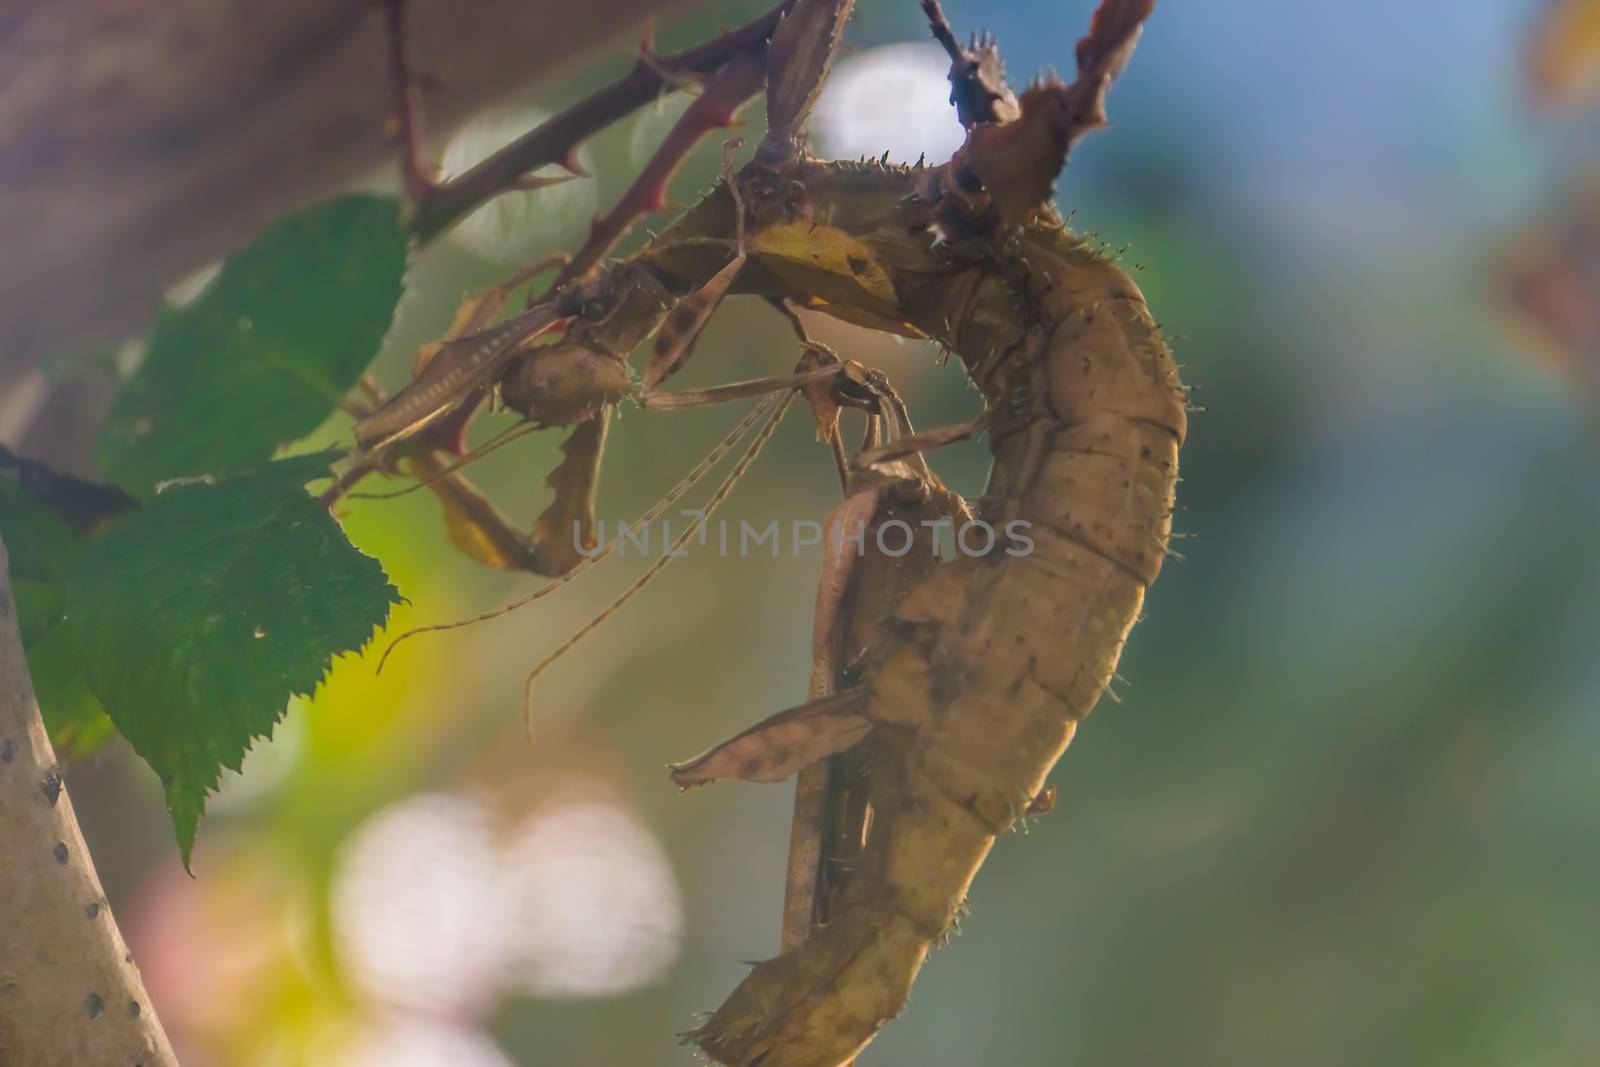 Male and female spiny leaf insect together, tropical walking stick specie from Australia by charlottebleijenberg